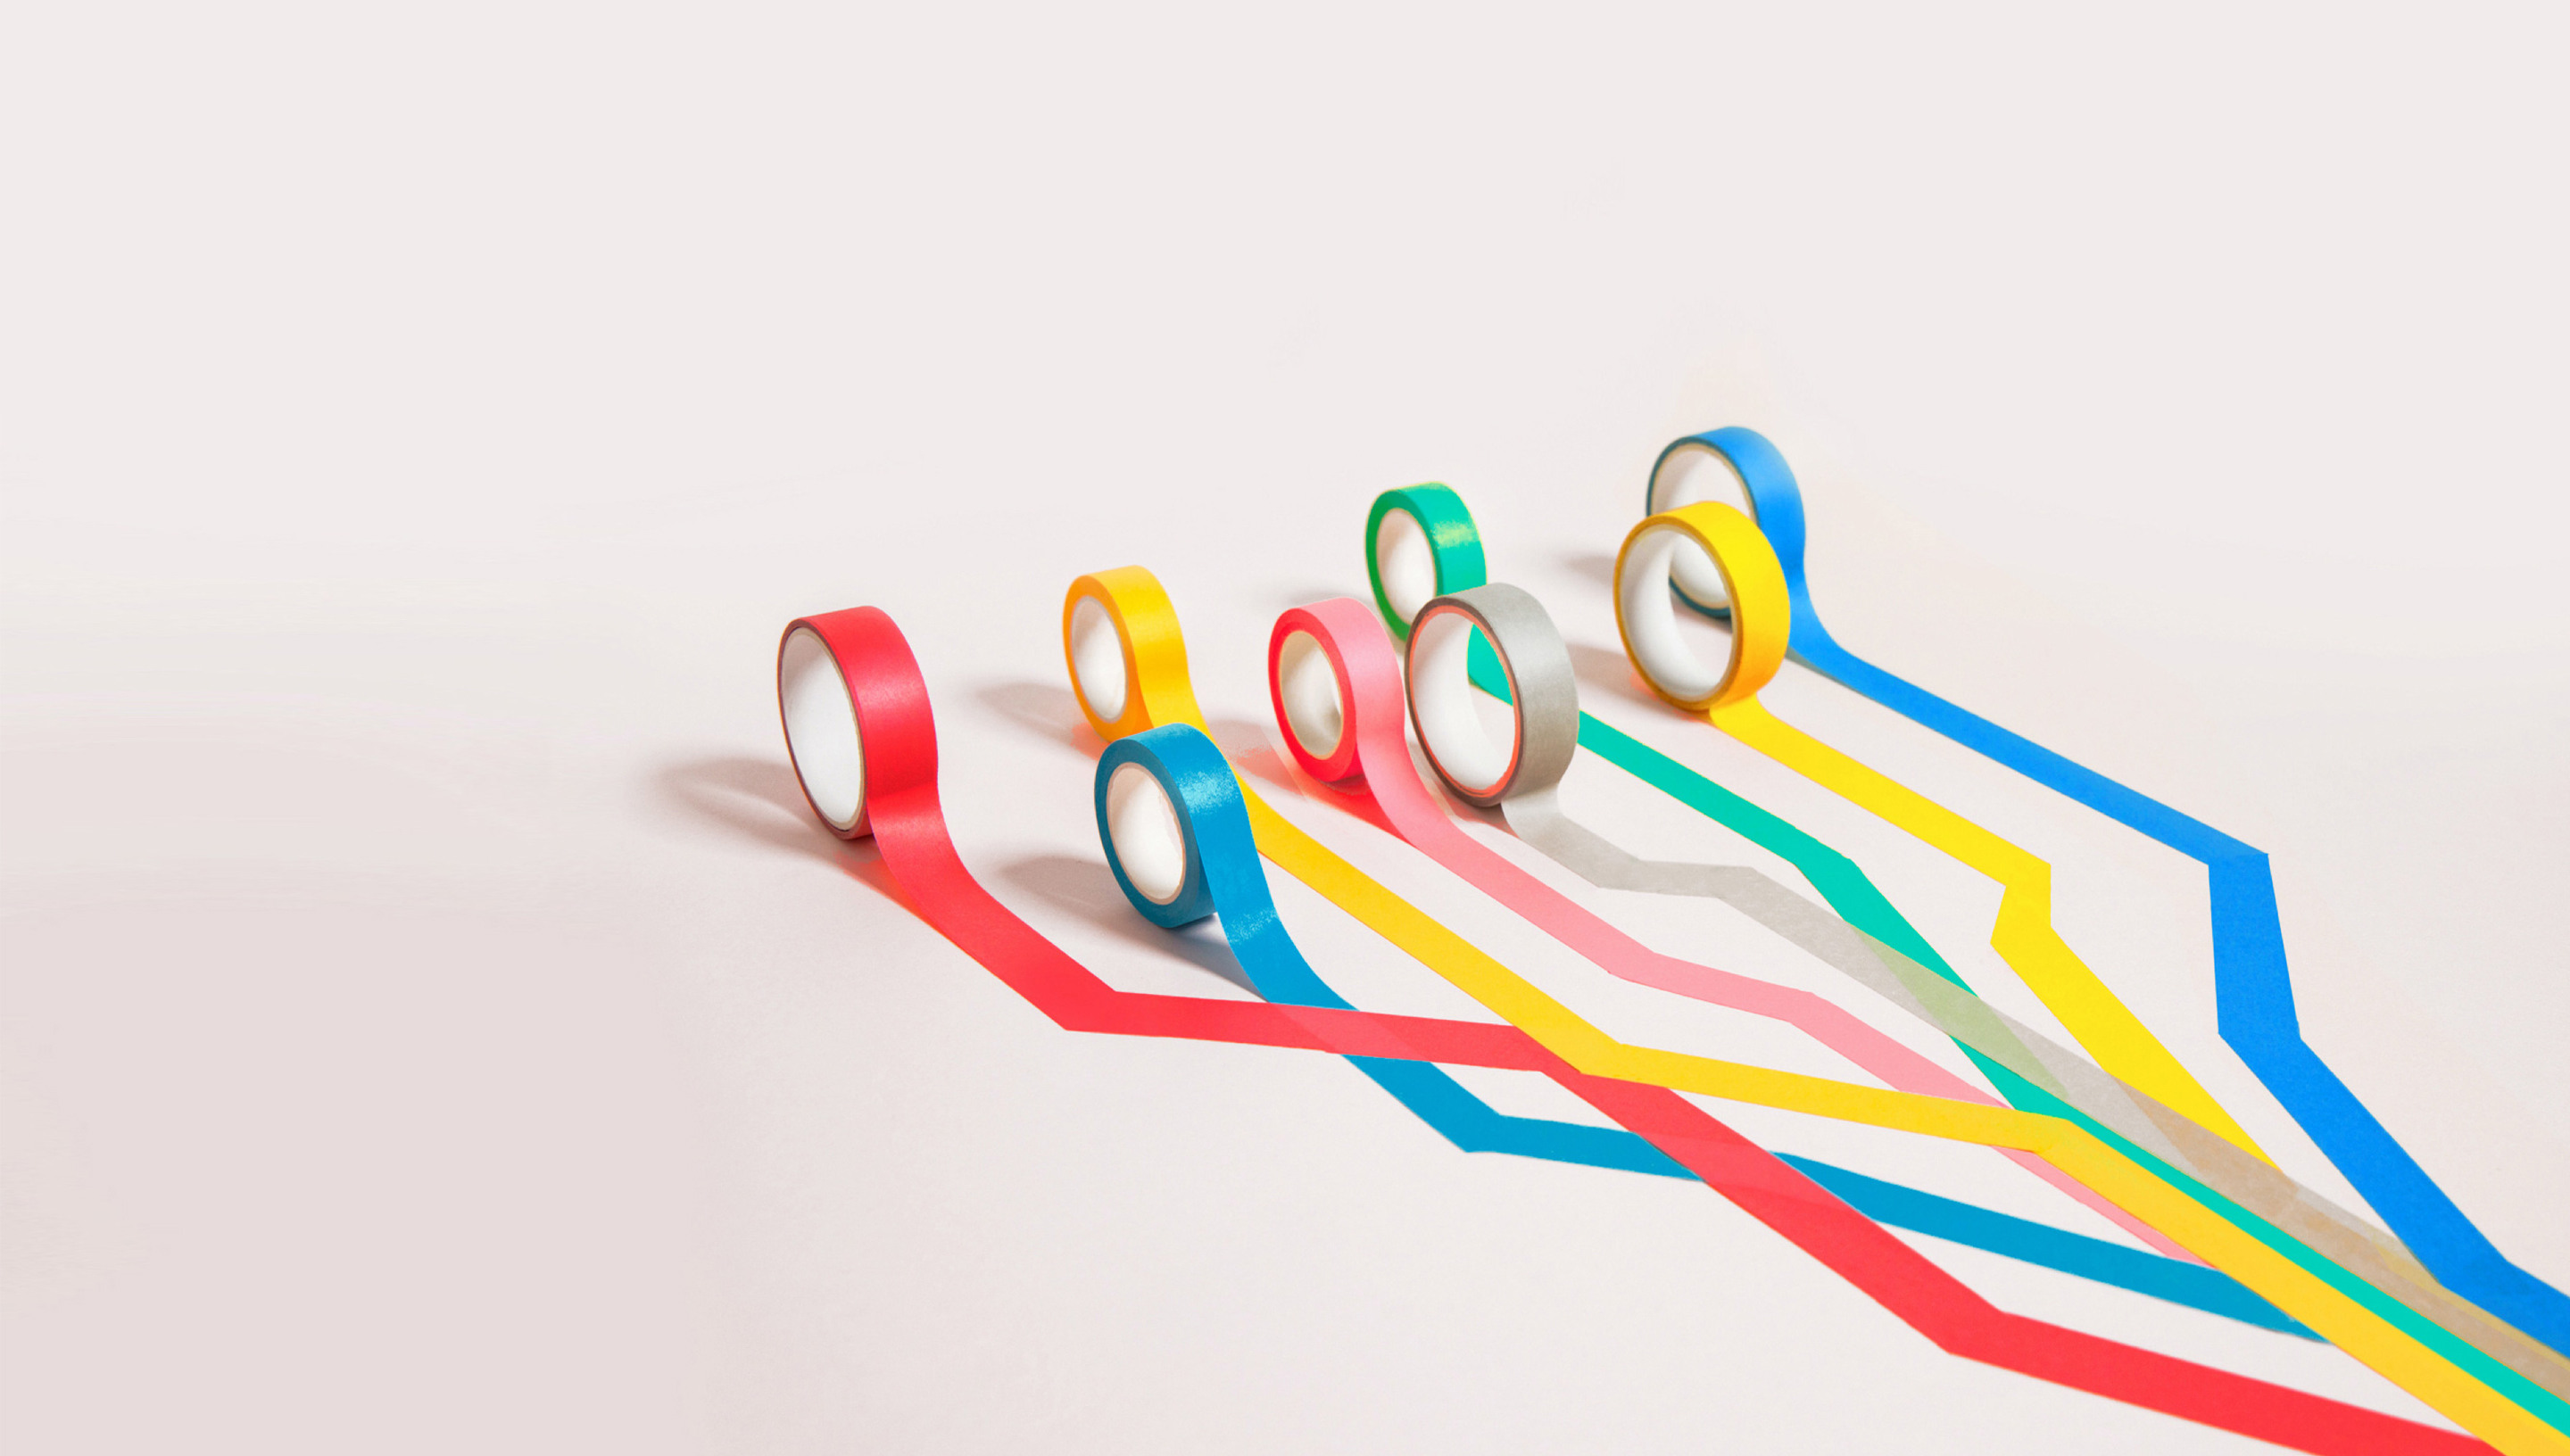 multi-colored rolls of tape unrolling side-by-side